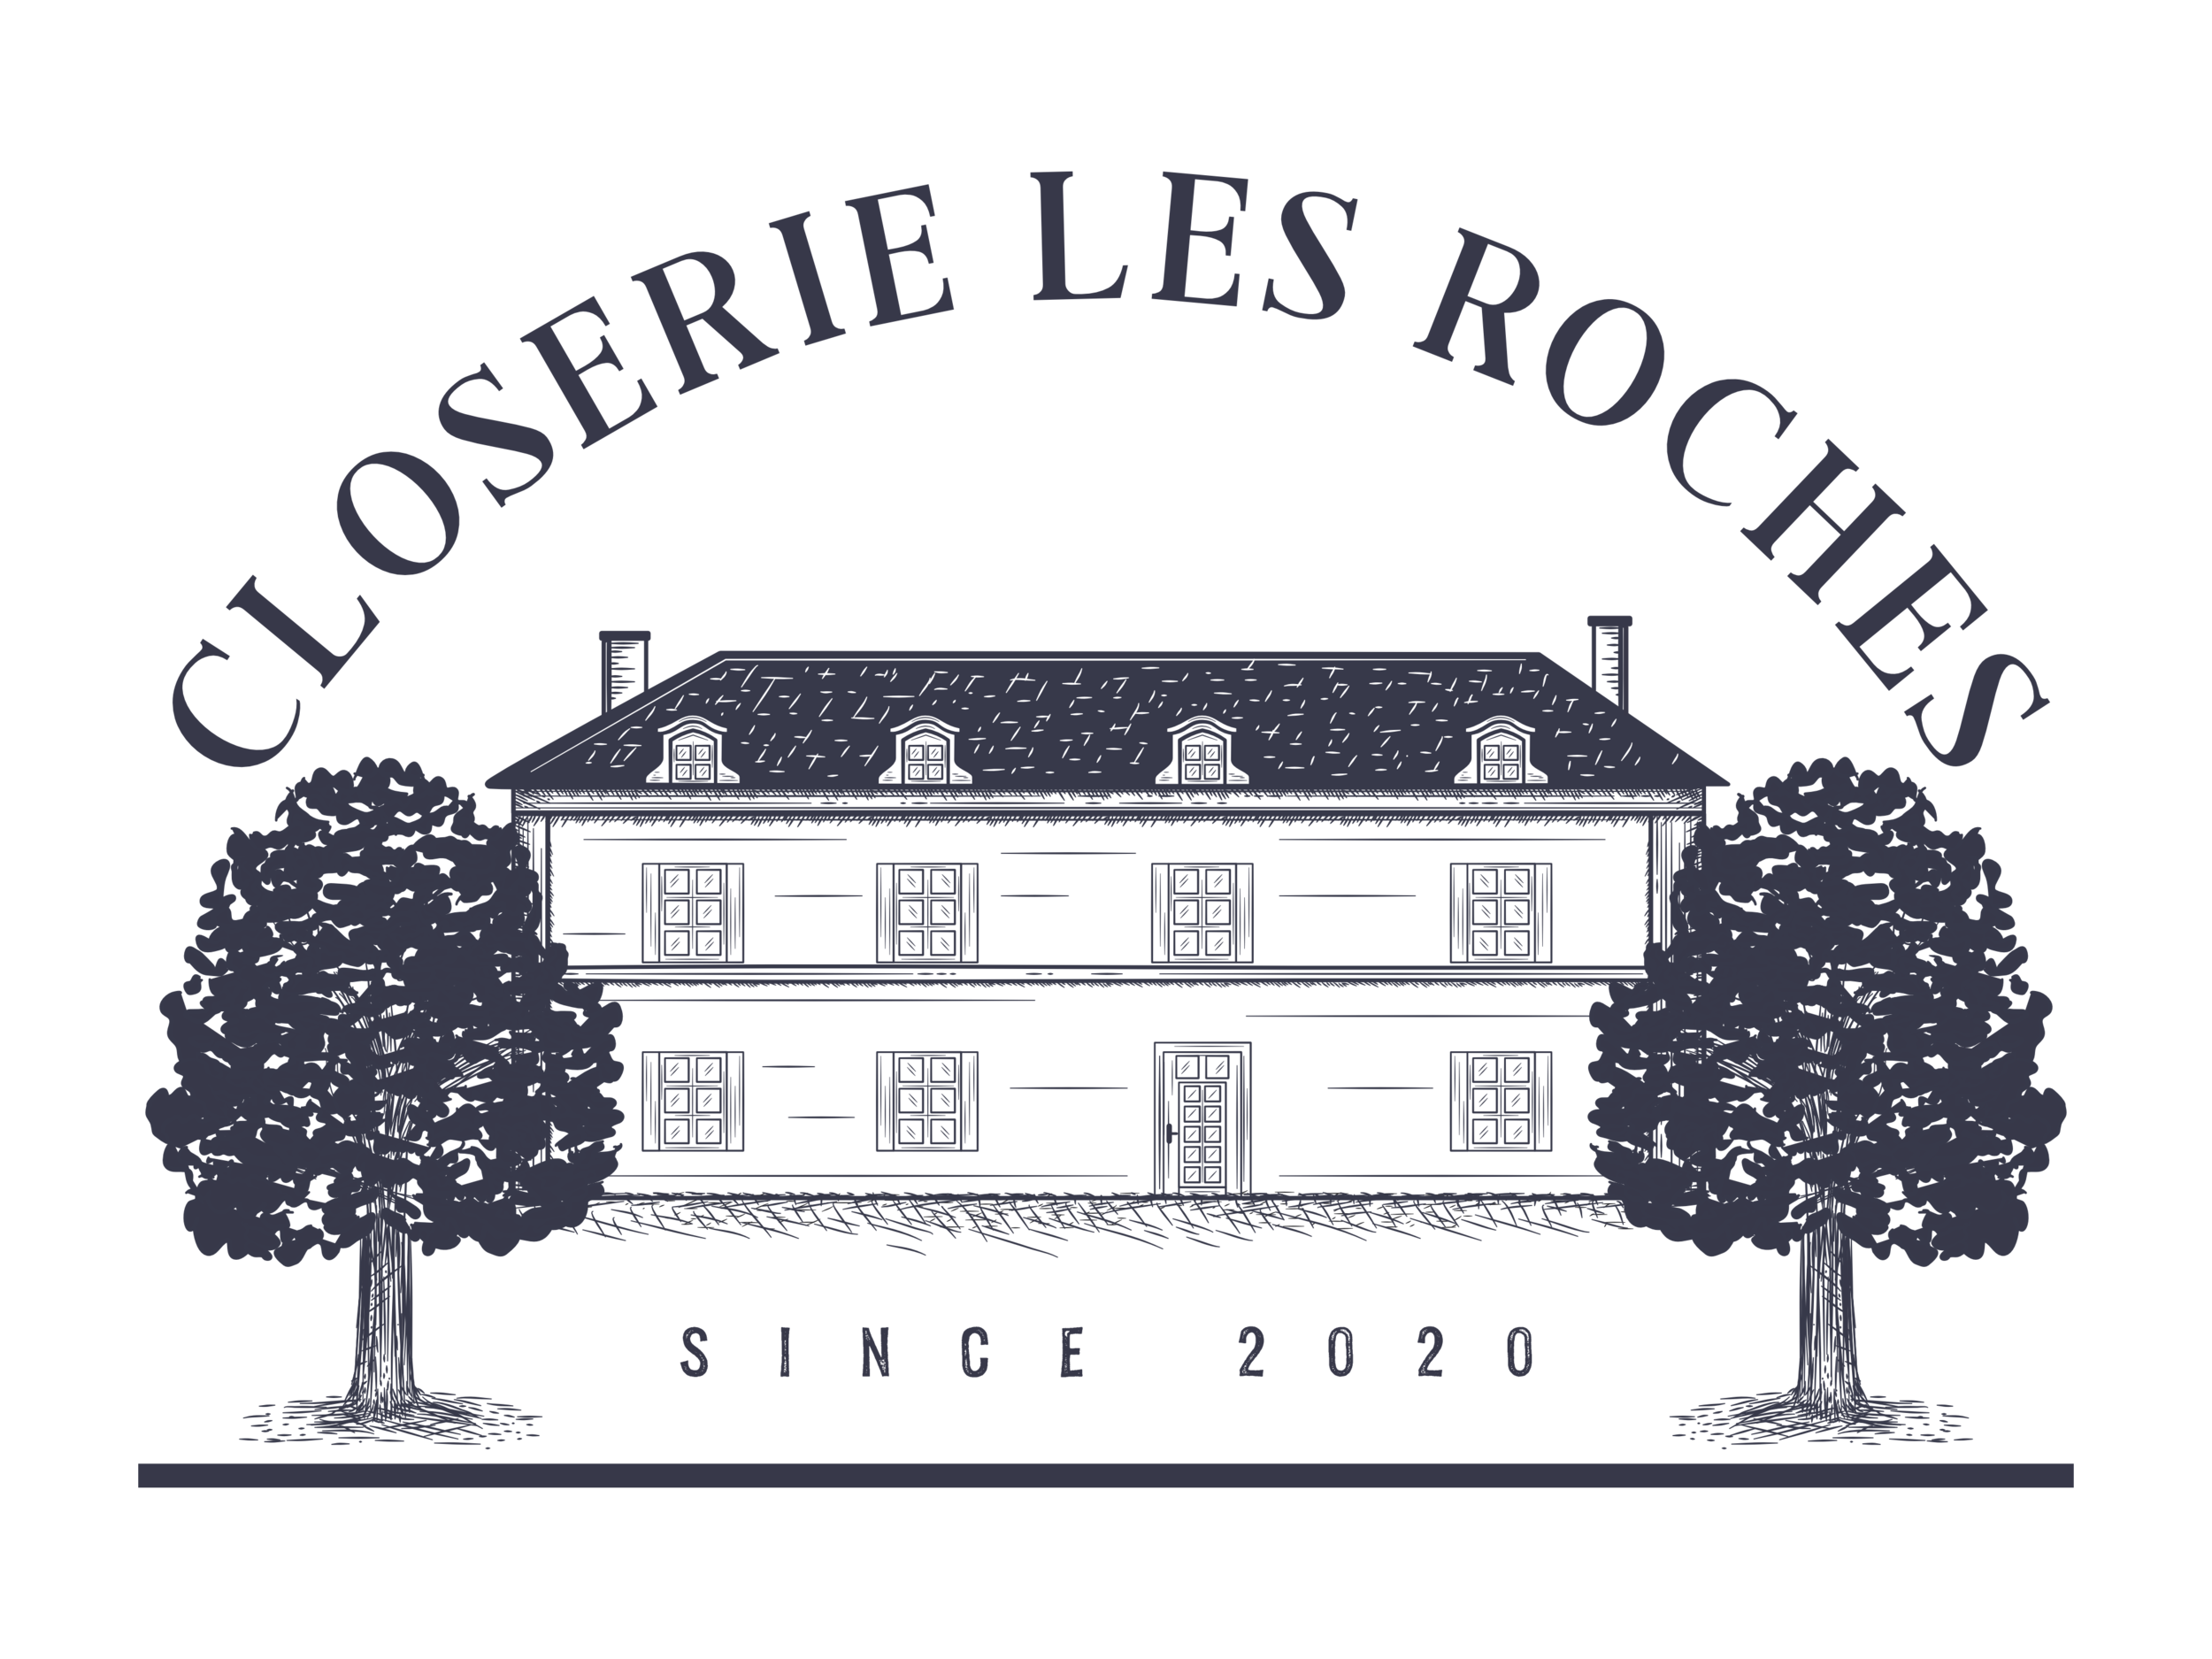 Closerie Les Roches